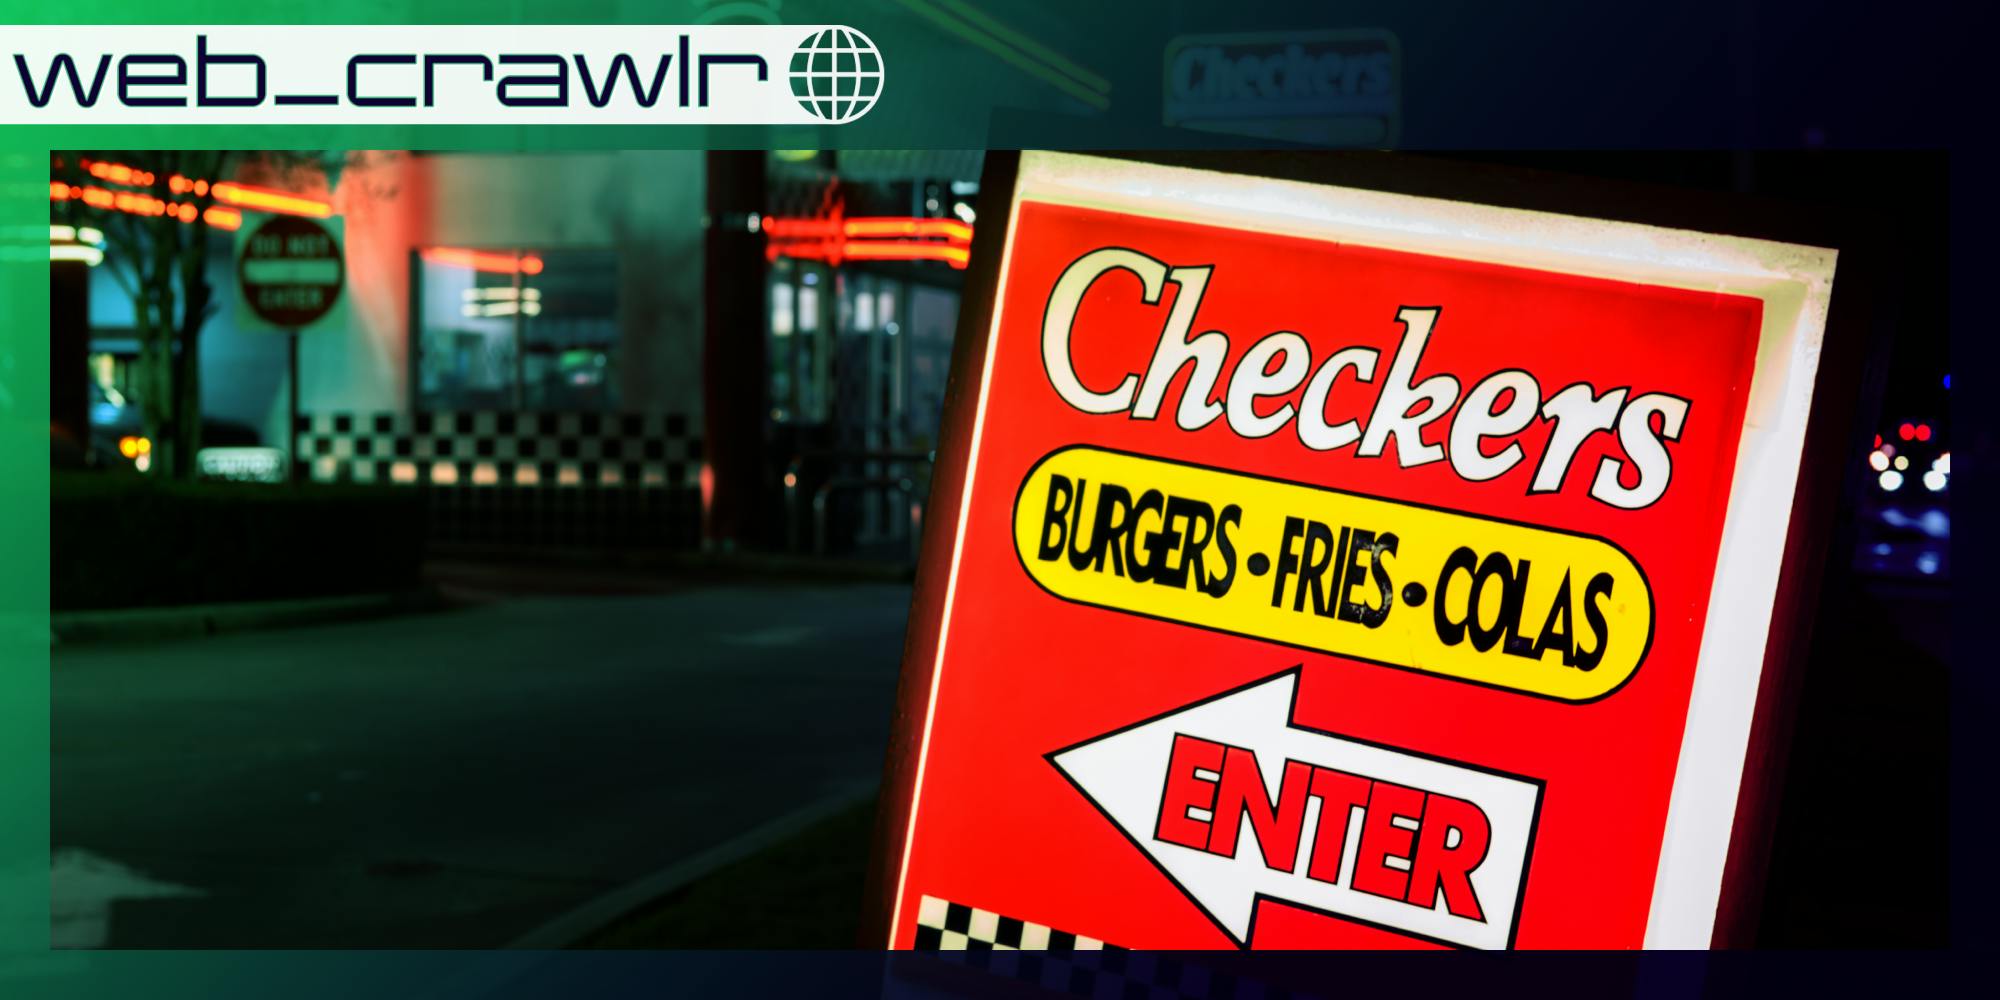 A Checkers sign that says 'enter.' The Daily Dot newsletter web_crawlr logo is in the top left corner.